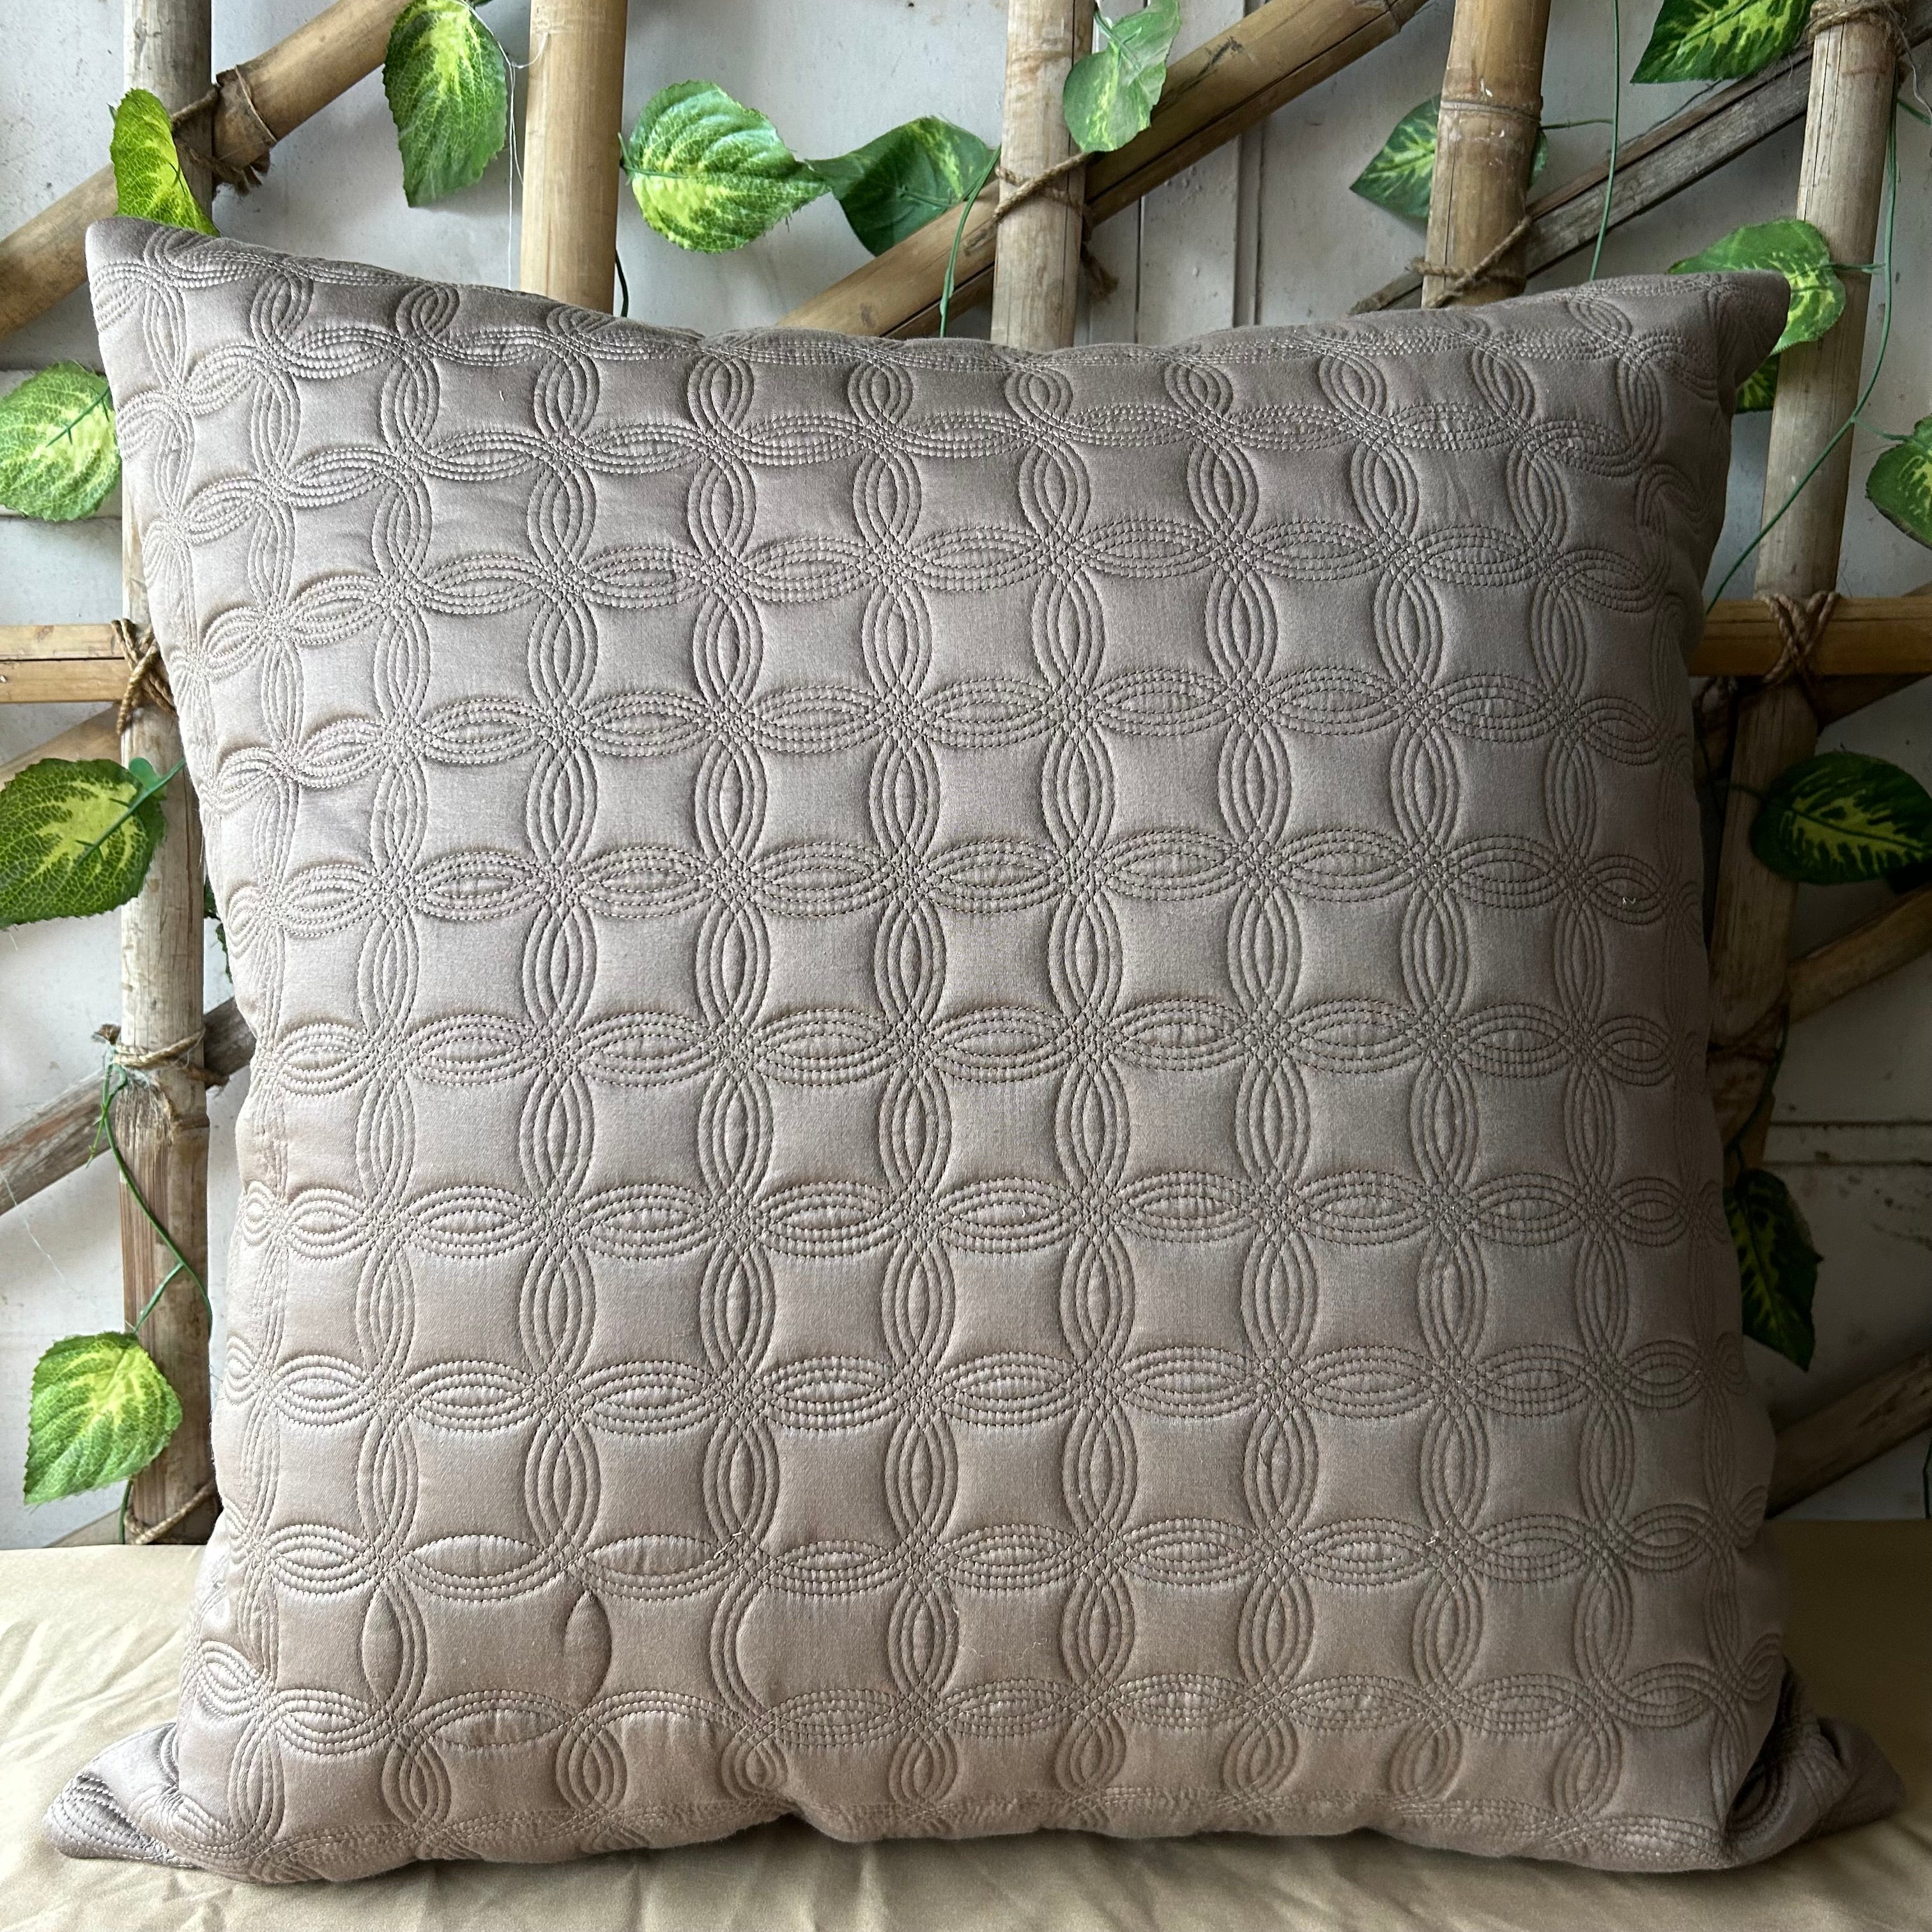 Orbit Beige and Taupe Quilted Reversible Cotton Euro Sham